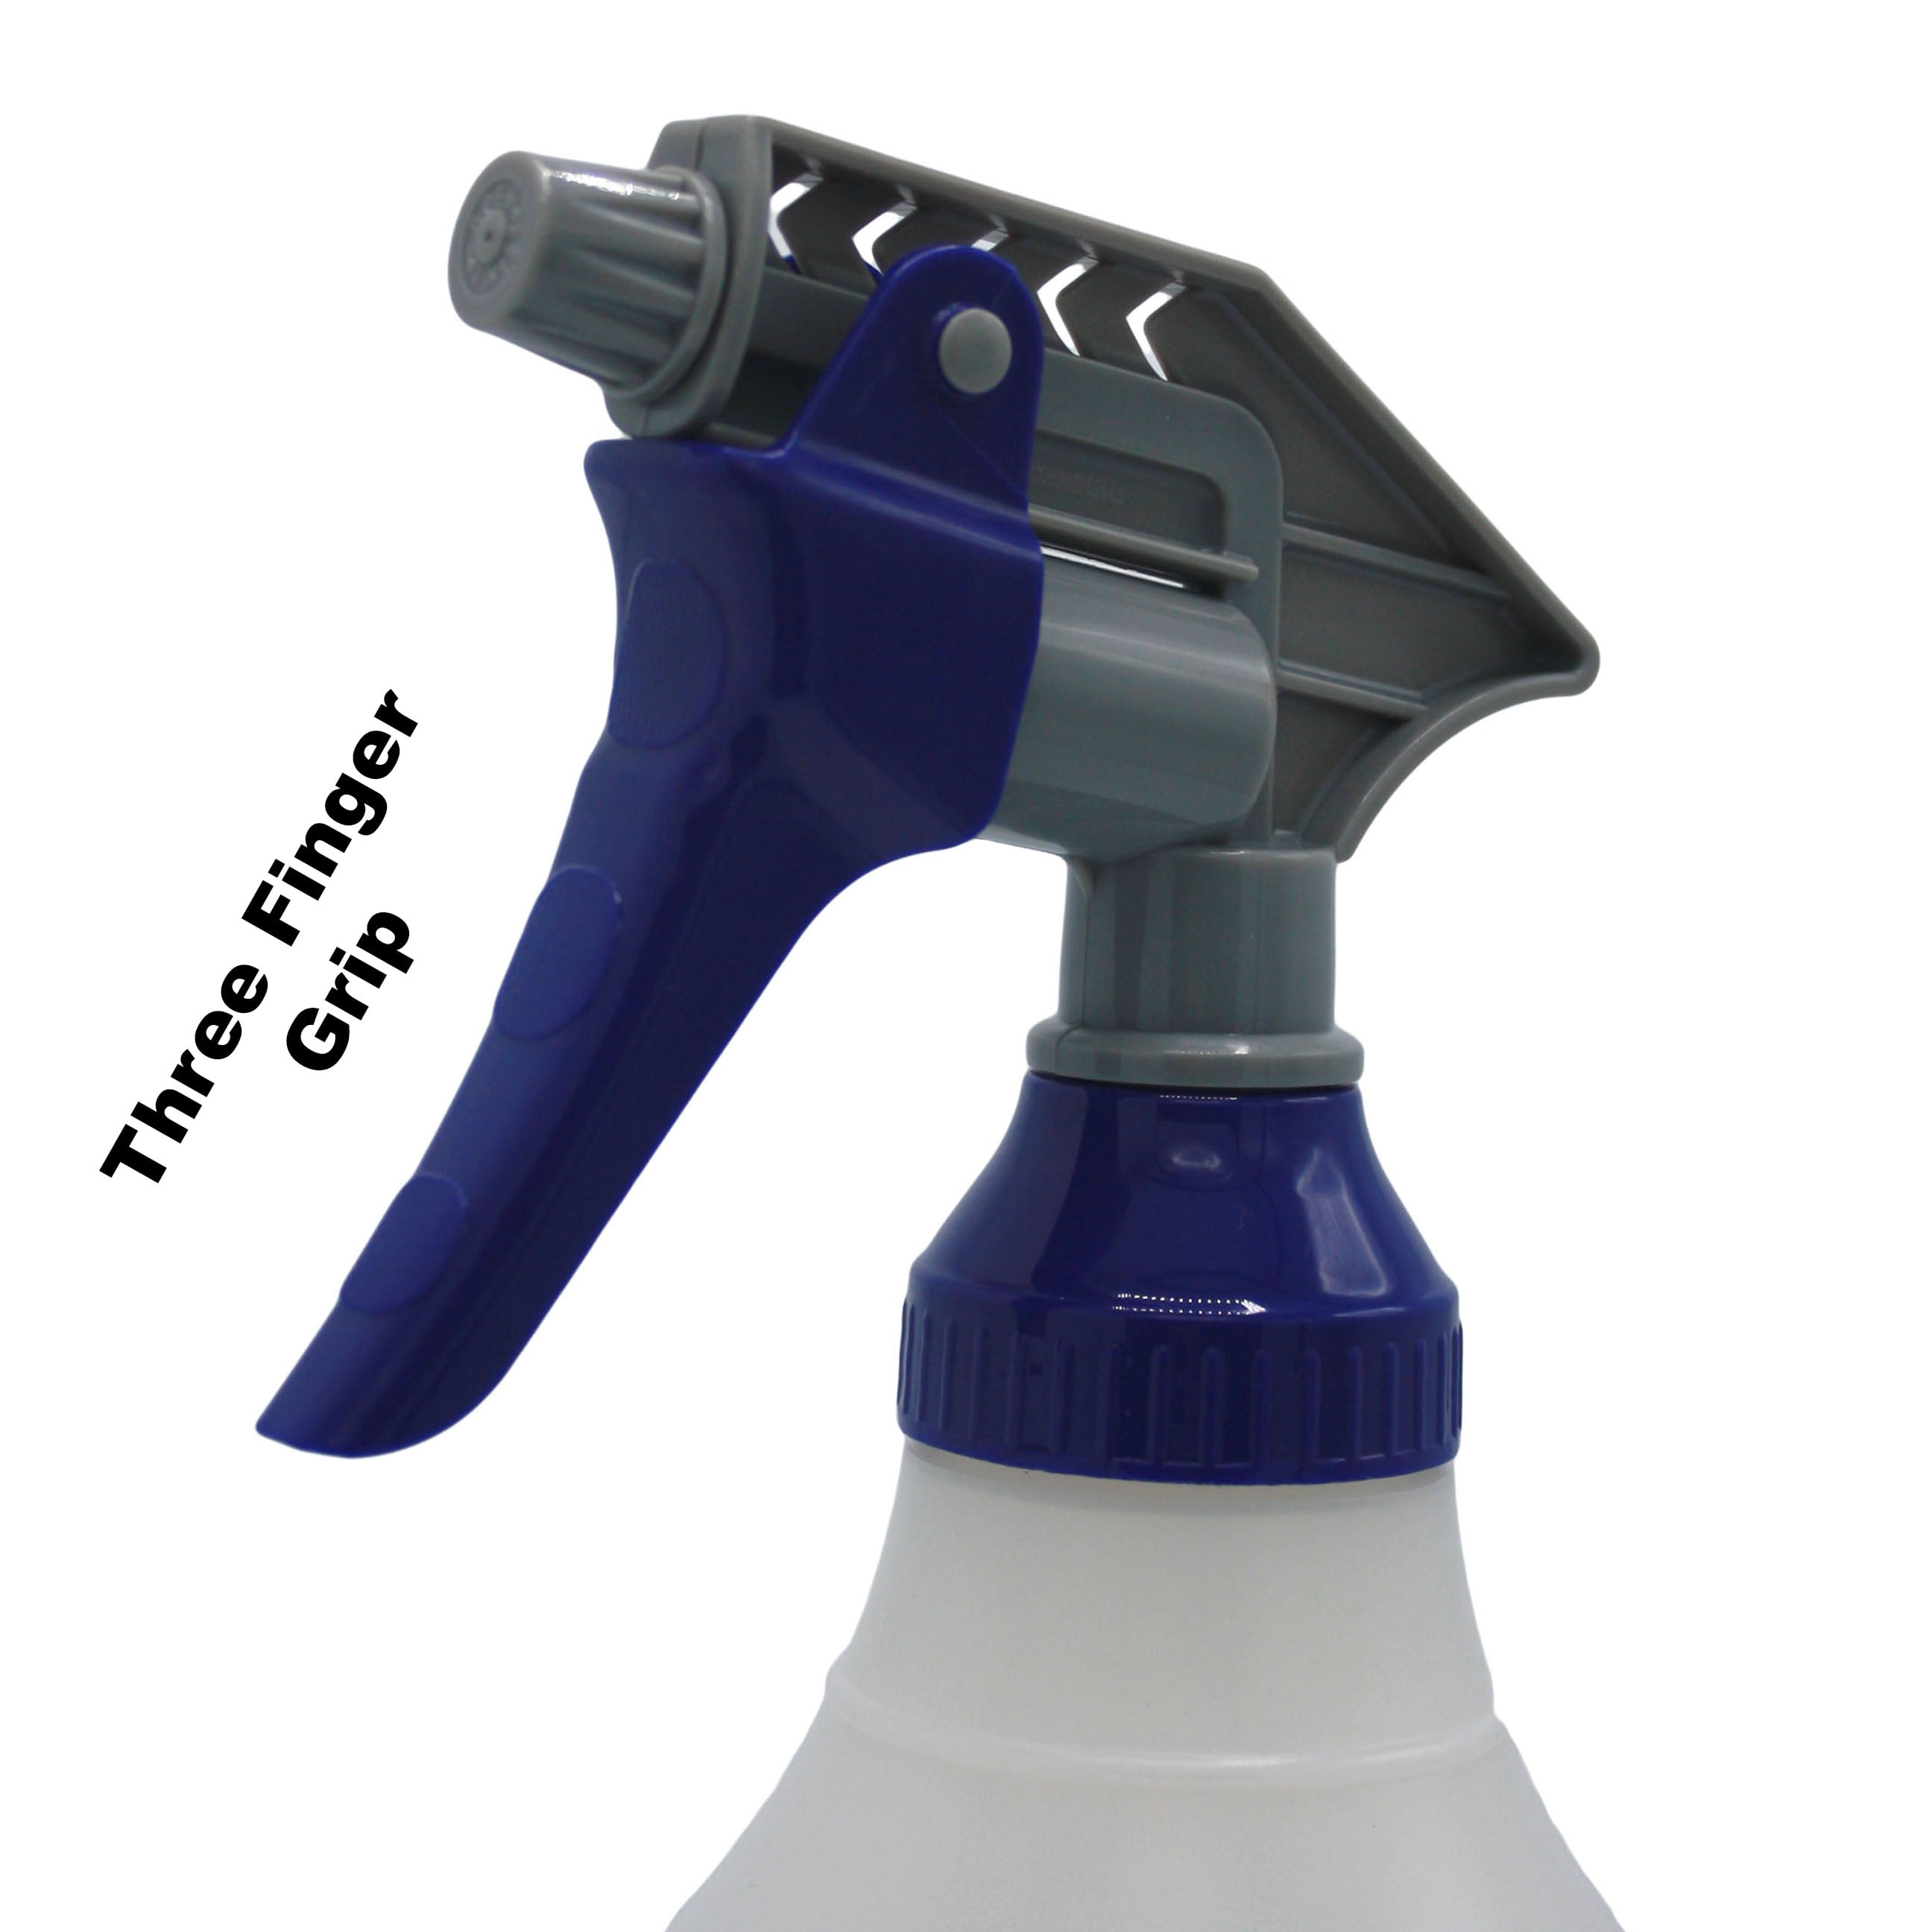 Heavy Duty INDUSTRIAL SPRAY BOTTLE 32 Ounce FOR HOME BREWING Blue-White  HAND SPRAYER for Cleaning Solution, STAR SAN, POT META - Hobby Homebrew